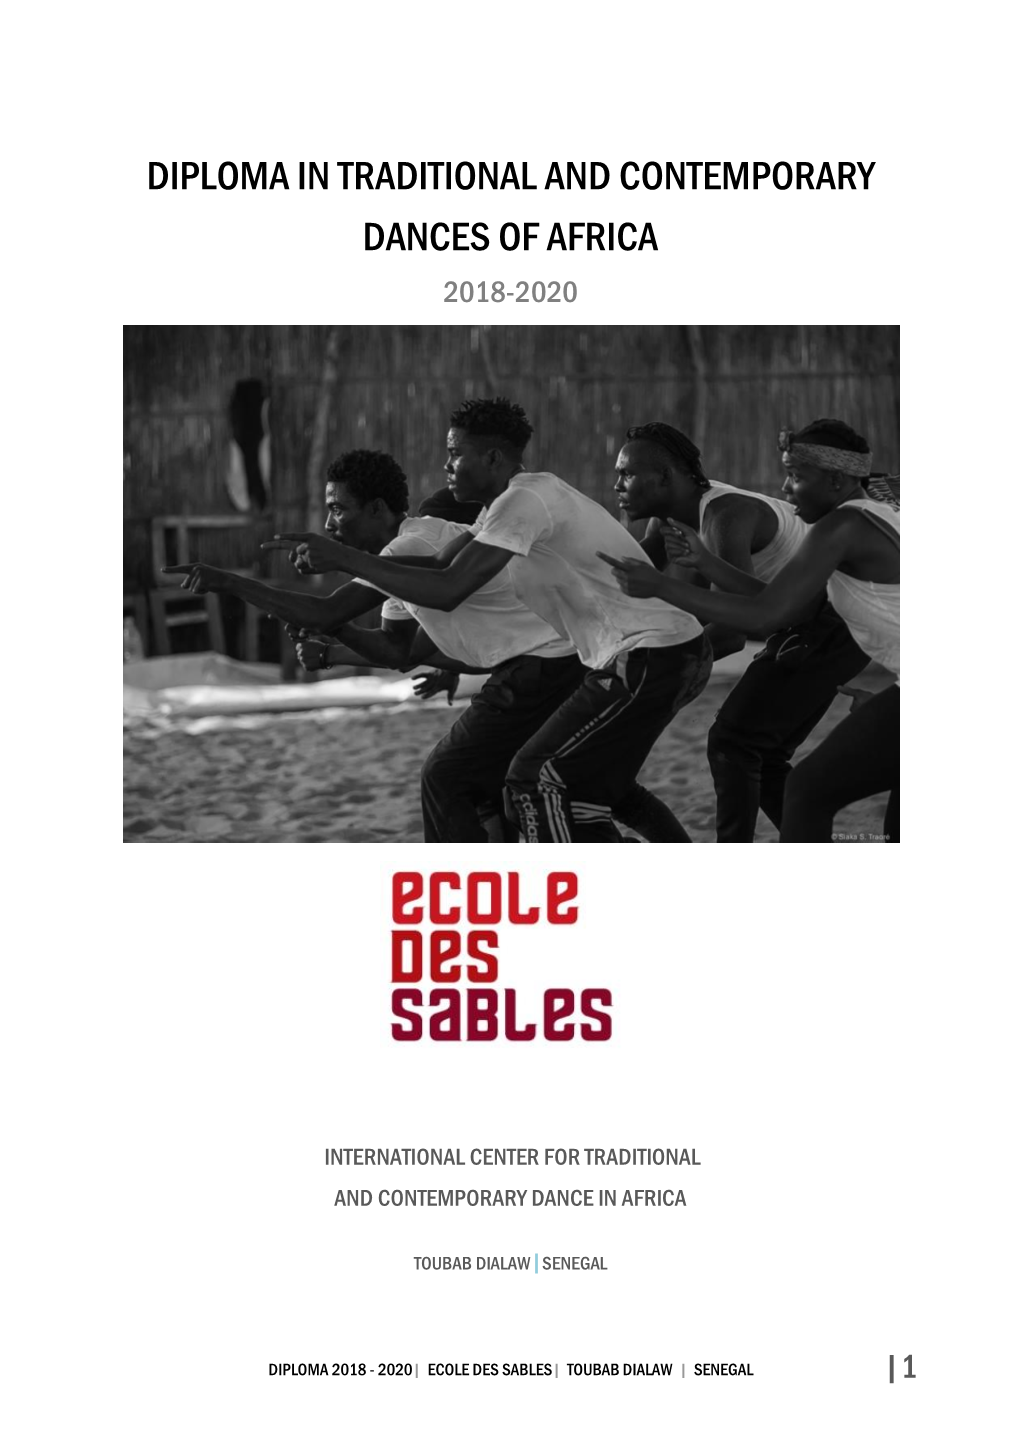 Diploma in Traditional and Contemporary Dances of Africa 2018-2020